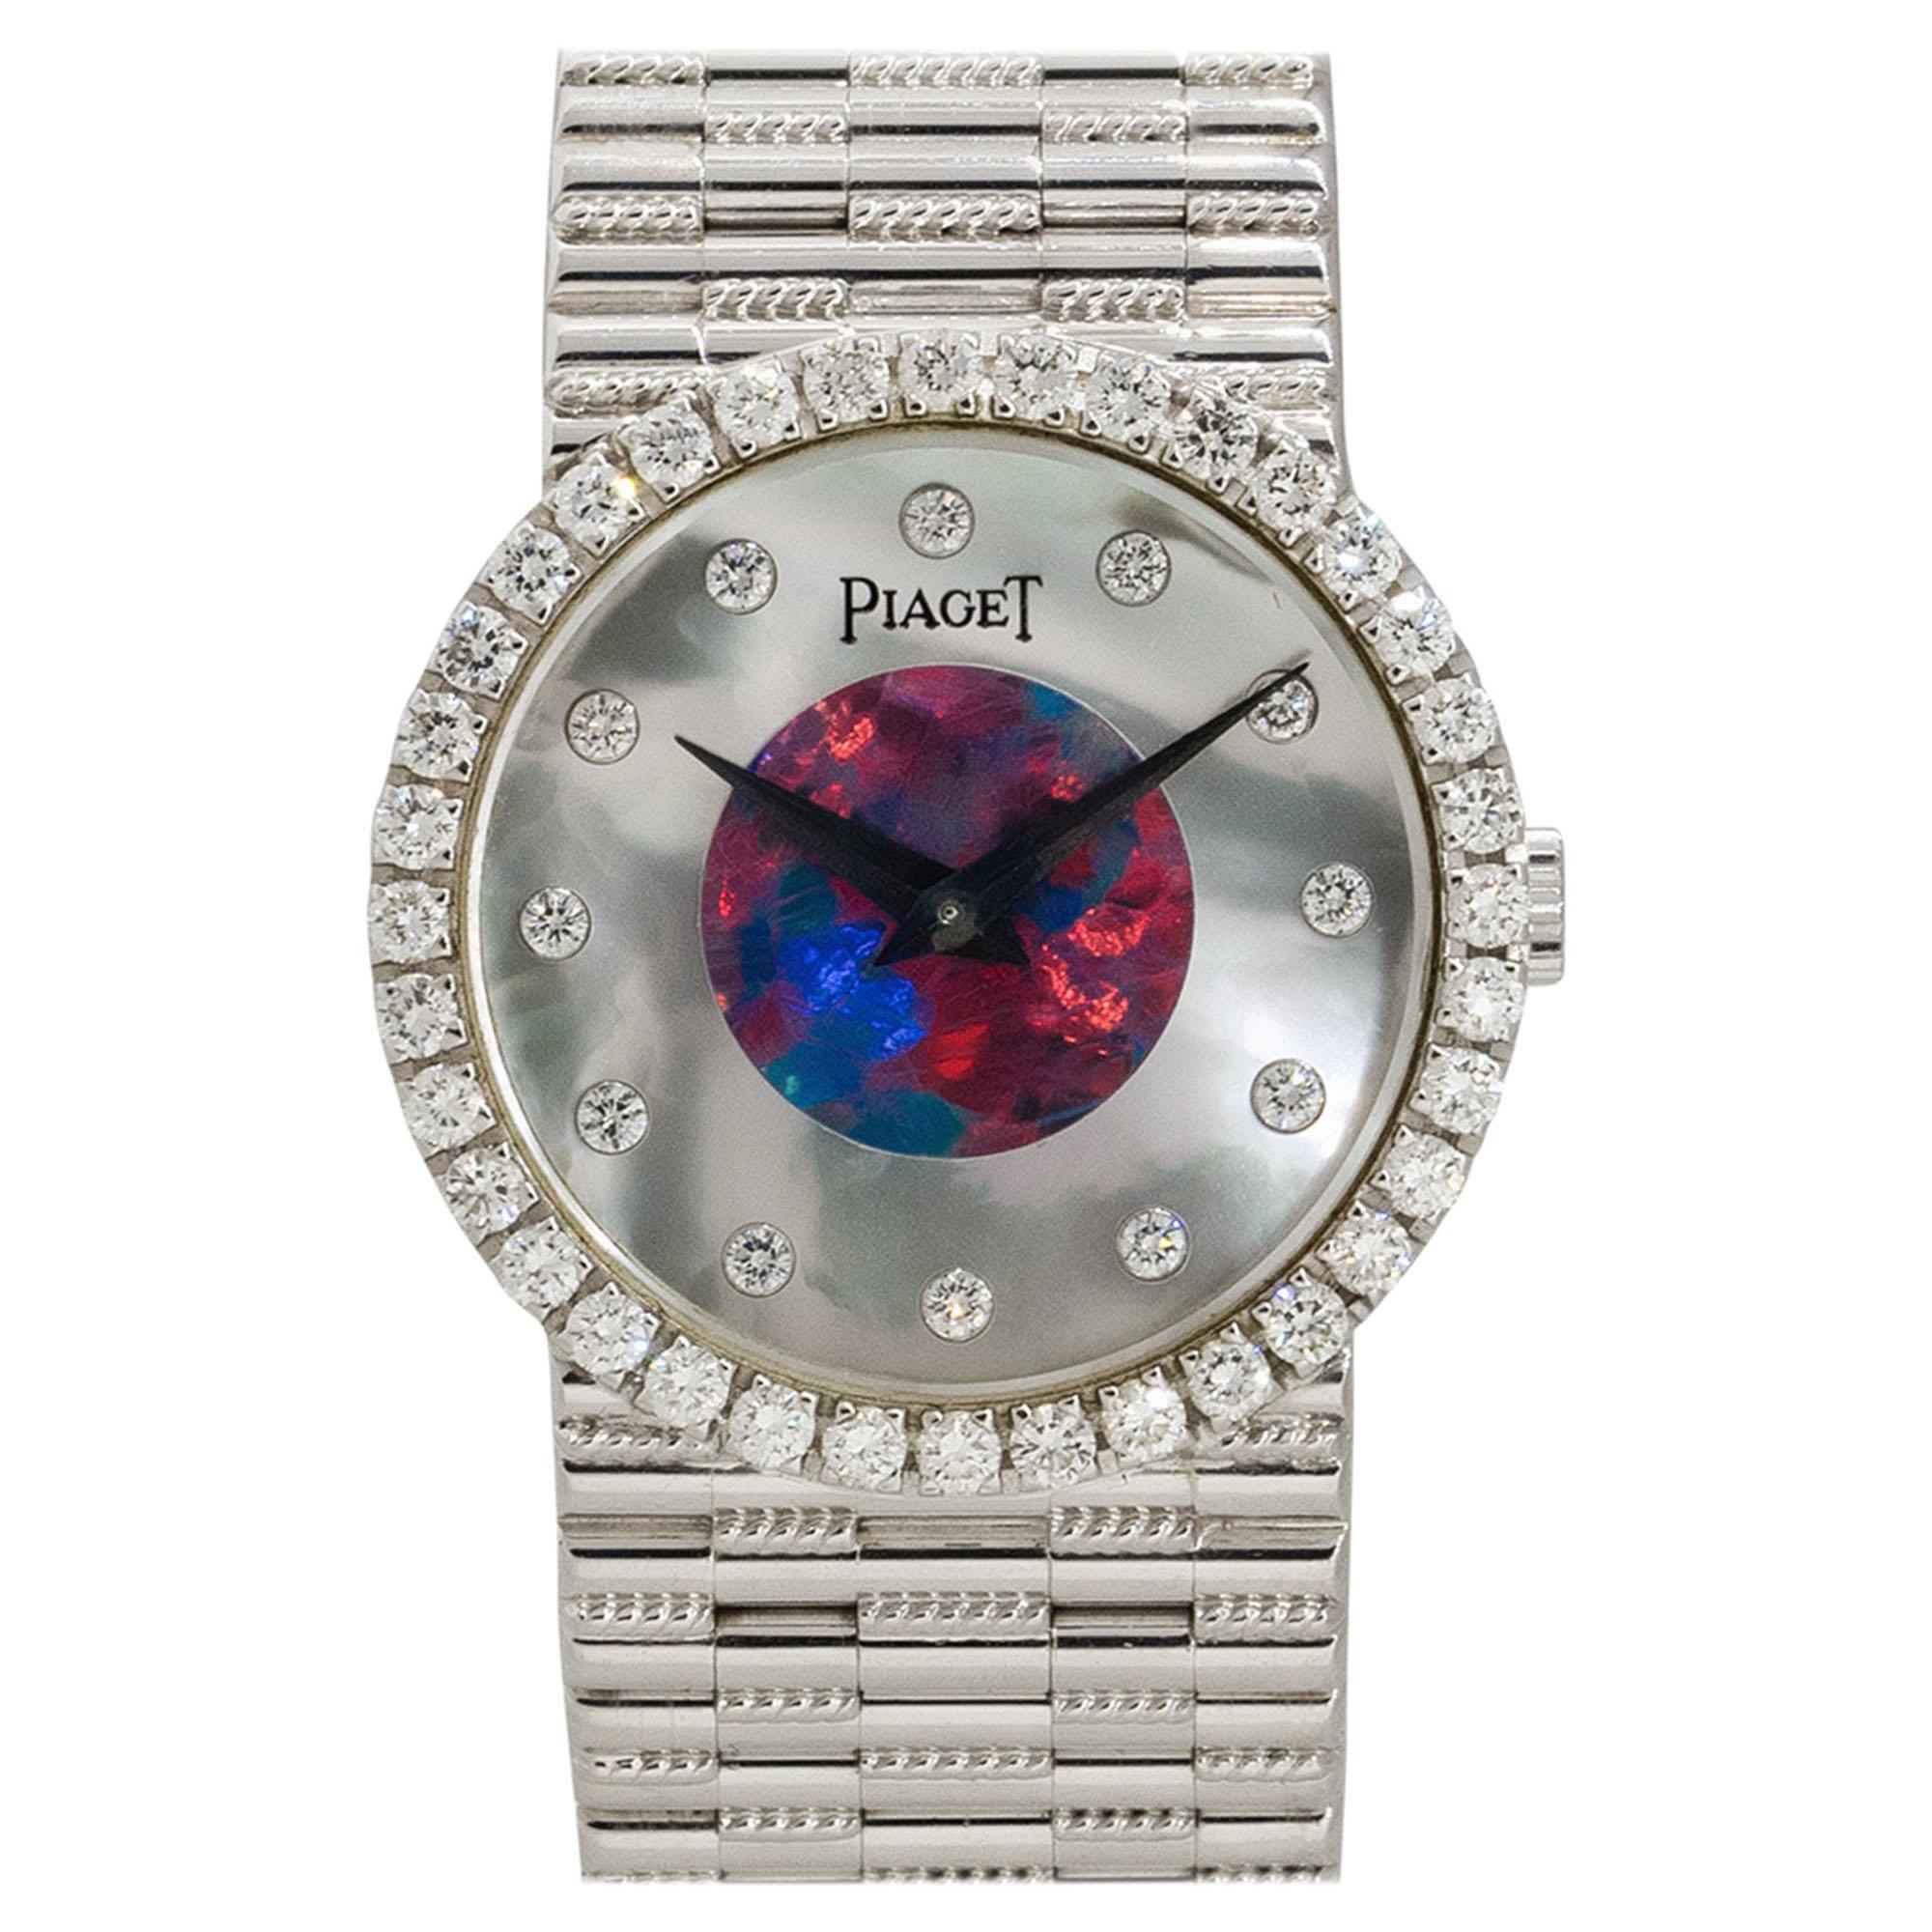 Piaget 9706G2 18k White Gold Mother of Pearl Opal Ladies Watch